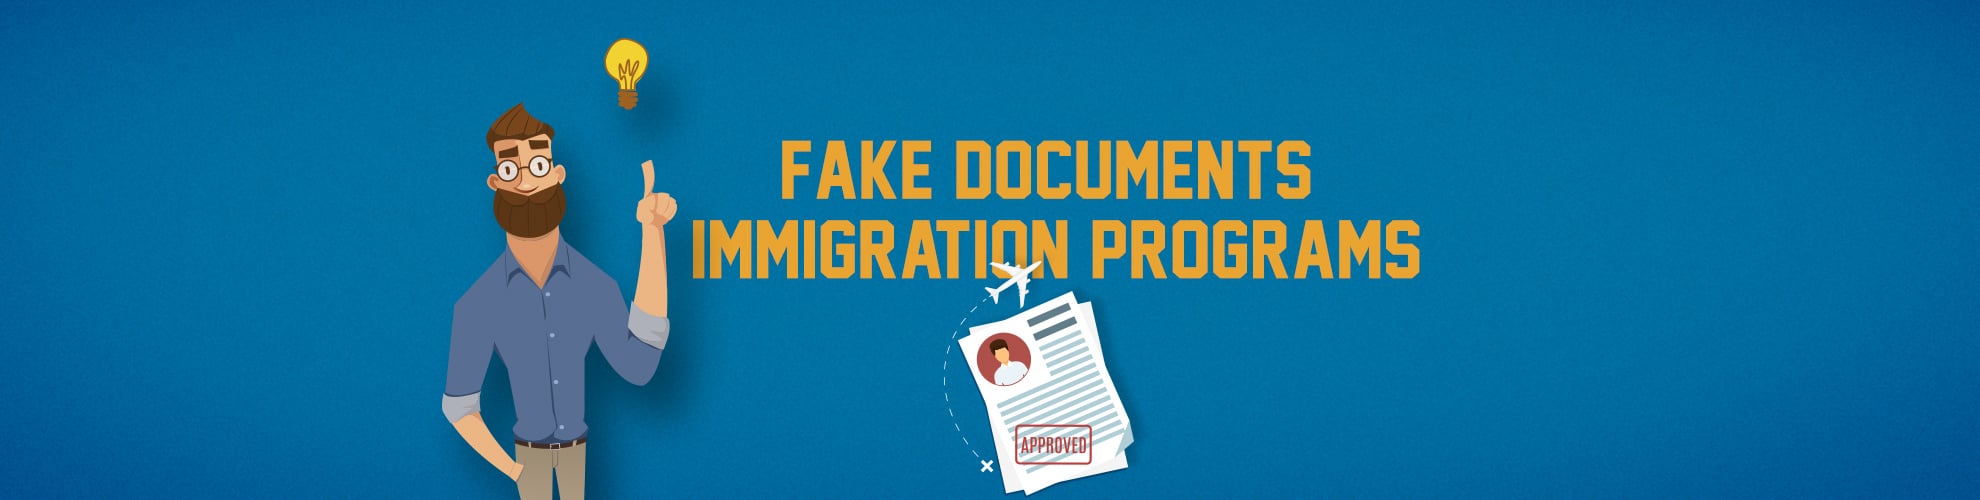 Fake Immigration Documents Online